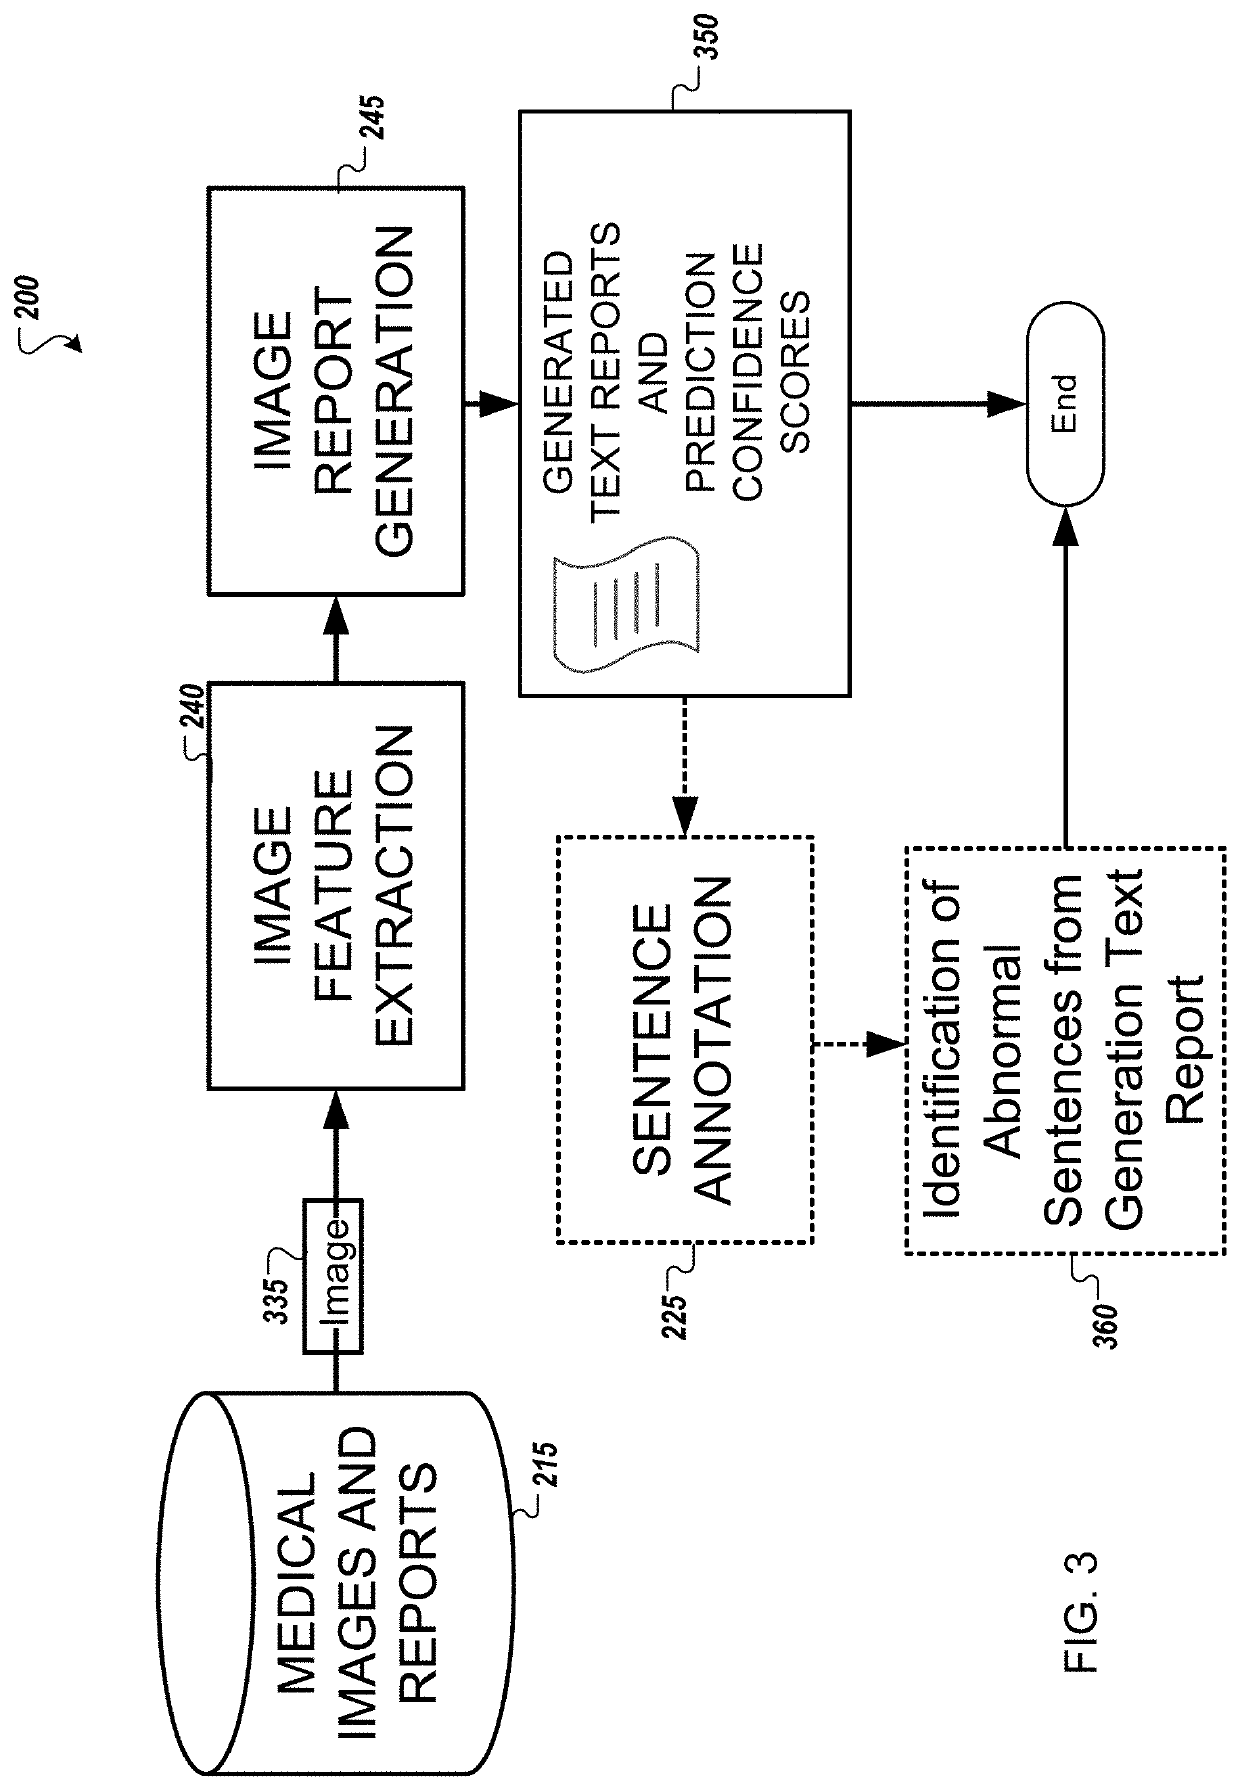 System and method for generating descriptions of abnormalities in medical images